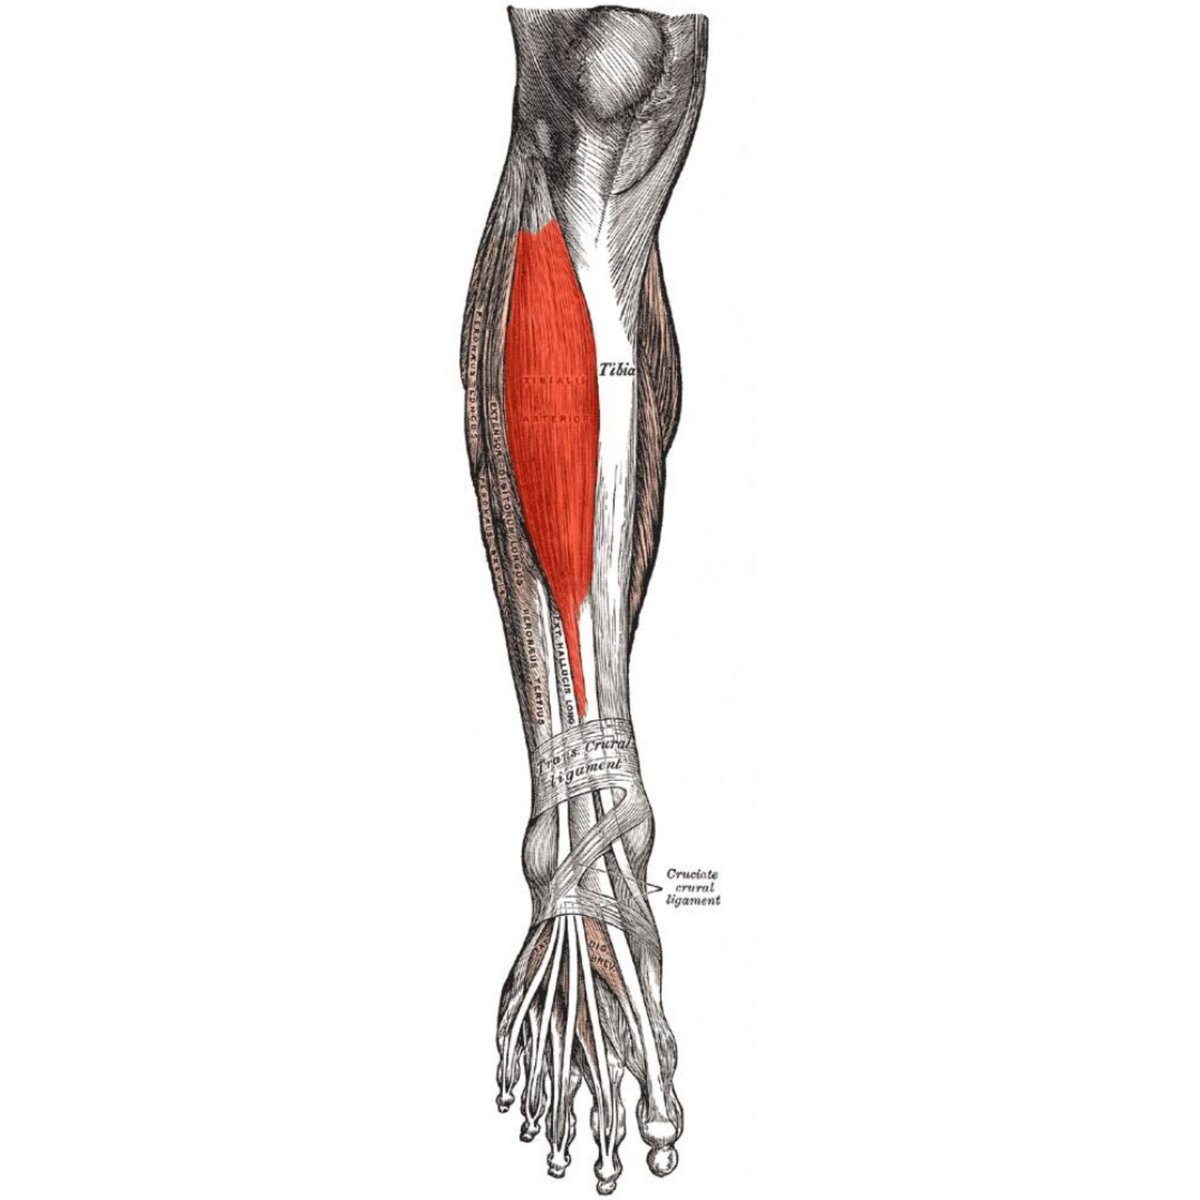 the tibialis anterior muscle is the largest and strongest muscle out of the four in the anterior compartment of the leg. Its functions include ankle dorsiflexion and foot inversion. It is innervated by the deep pereonal (fibular) nerve and supplied by the anterior tibial artery.